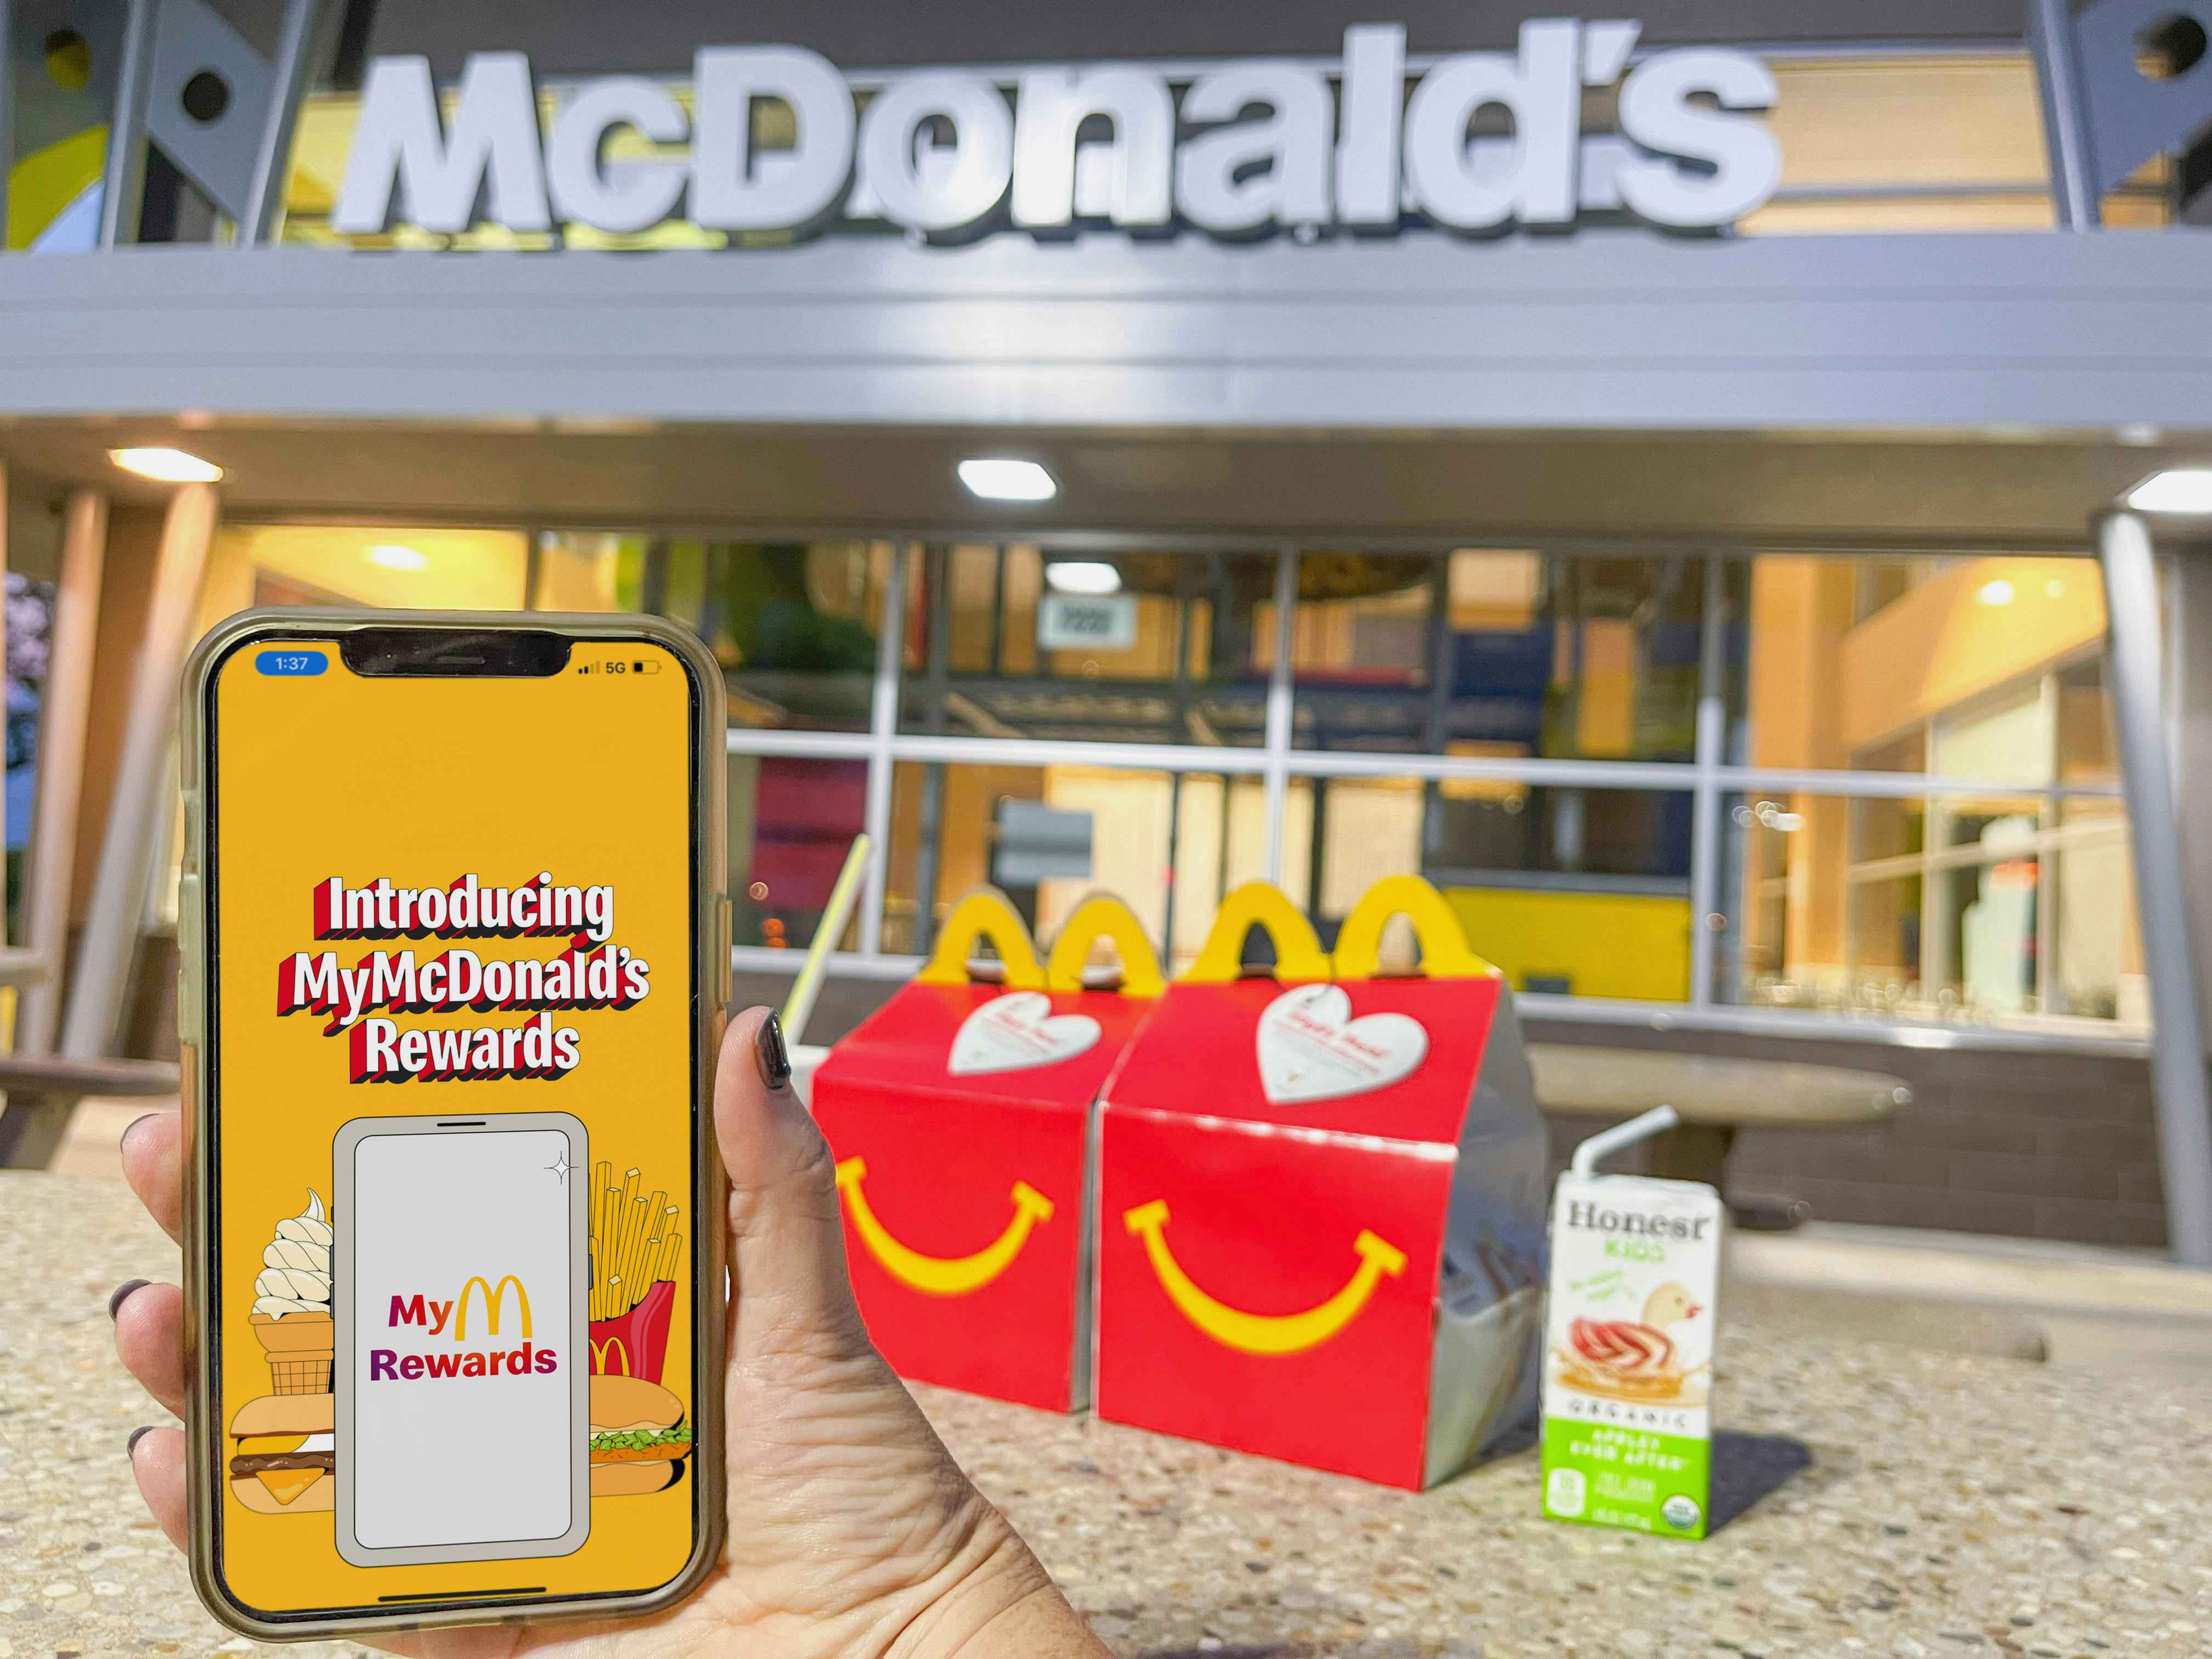 A person's hand holding up a cell phone displaying the McDonald's Rewards app in front of two Happy Meals and a juice box sitting on a table outside of a McDonald's restaurant.